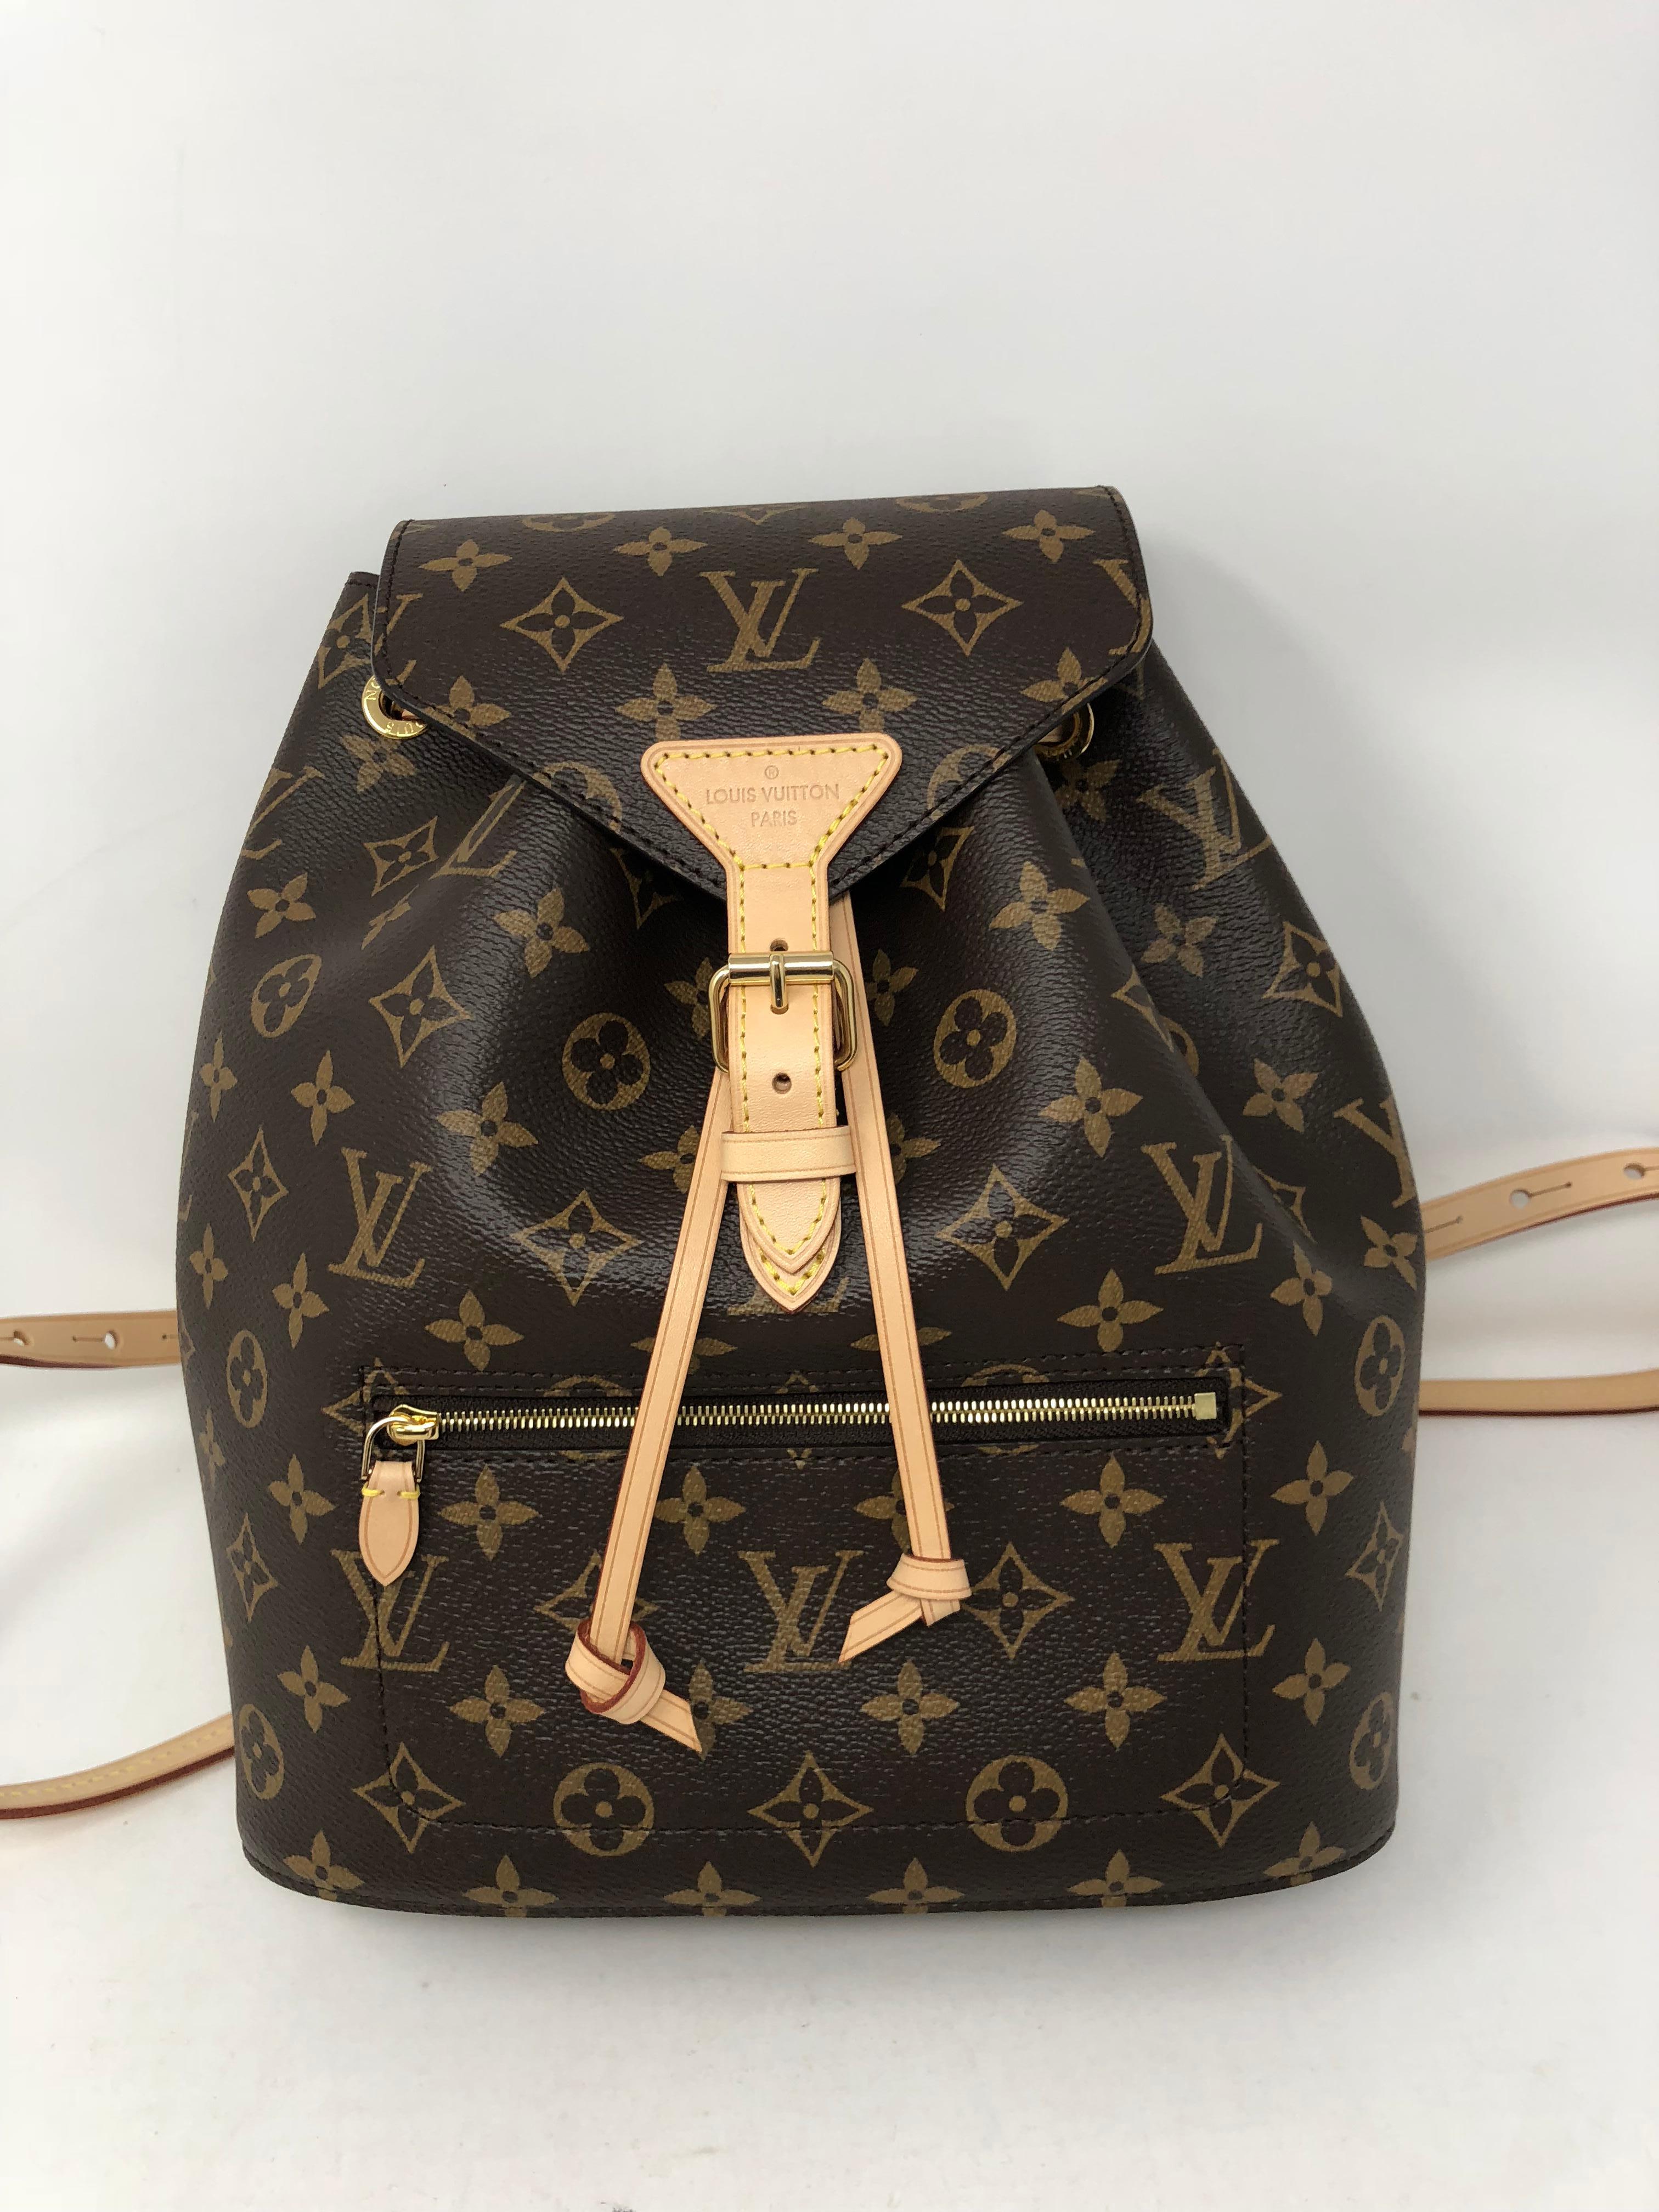 Louis Vuitton Monogram Montsouri Backpack. MM size. Newest version by LV. Brand new and hard to get. Never worn backpack comes with full set. Dust cover and box included. Guaranteed authentic. 